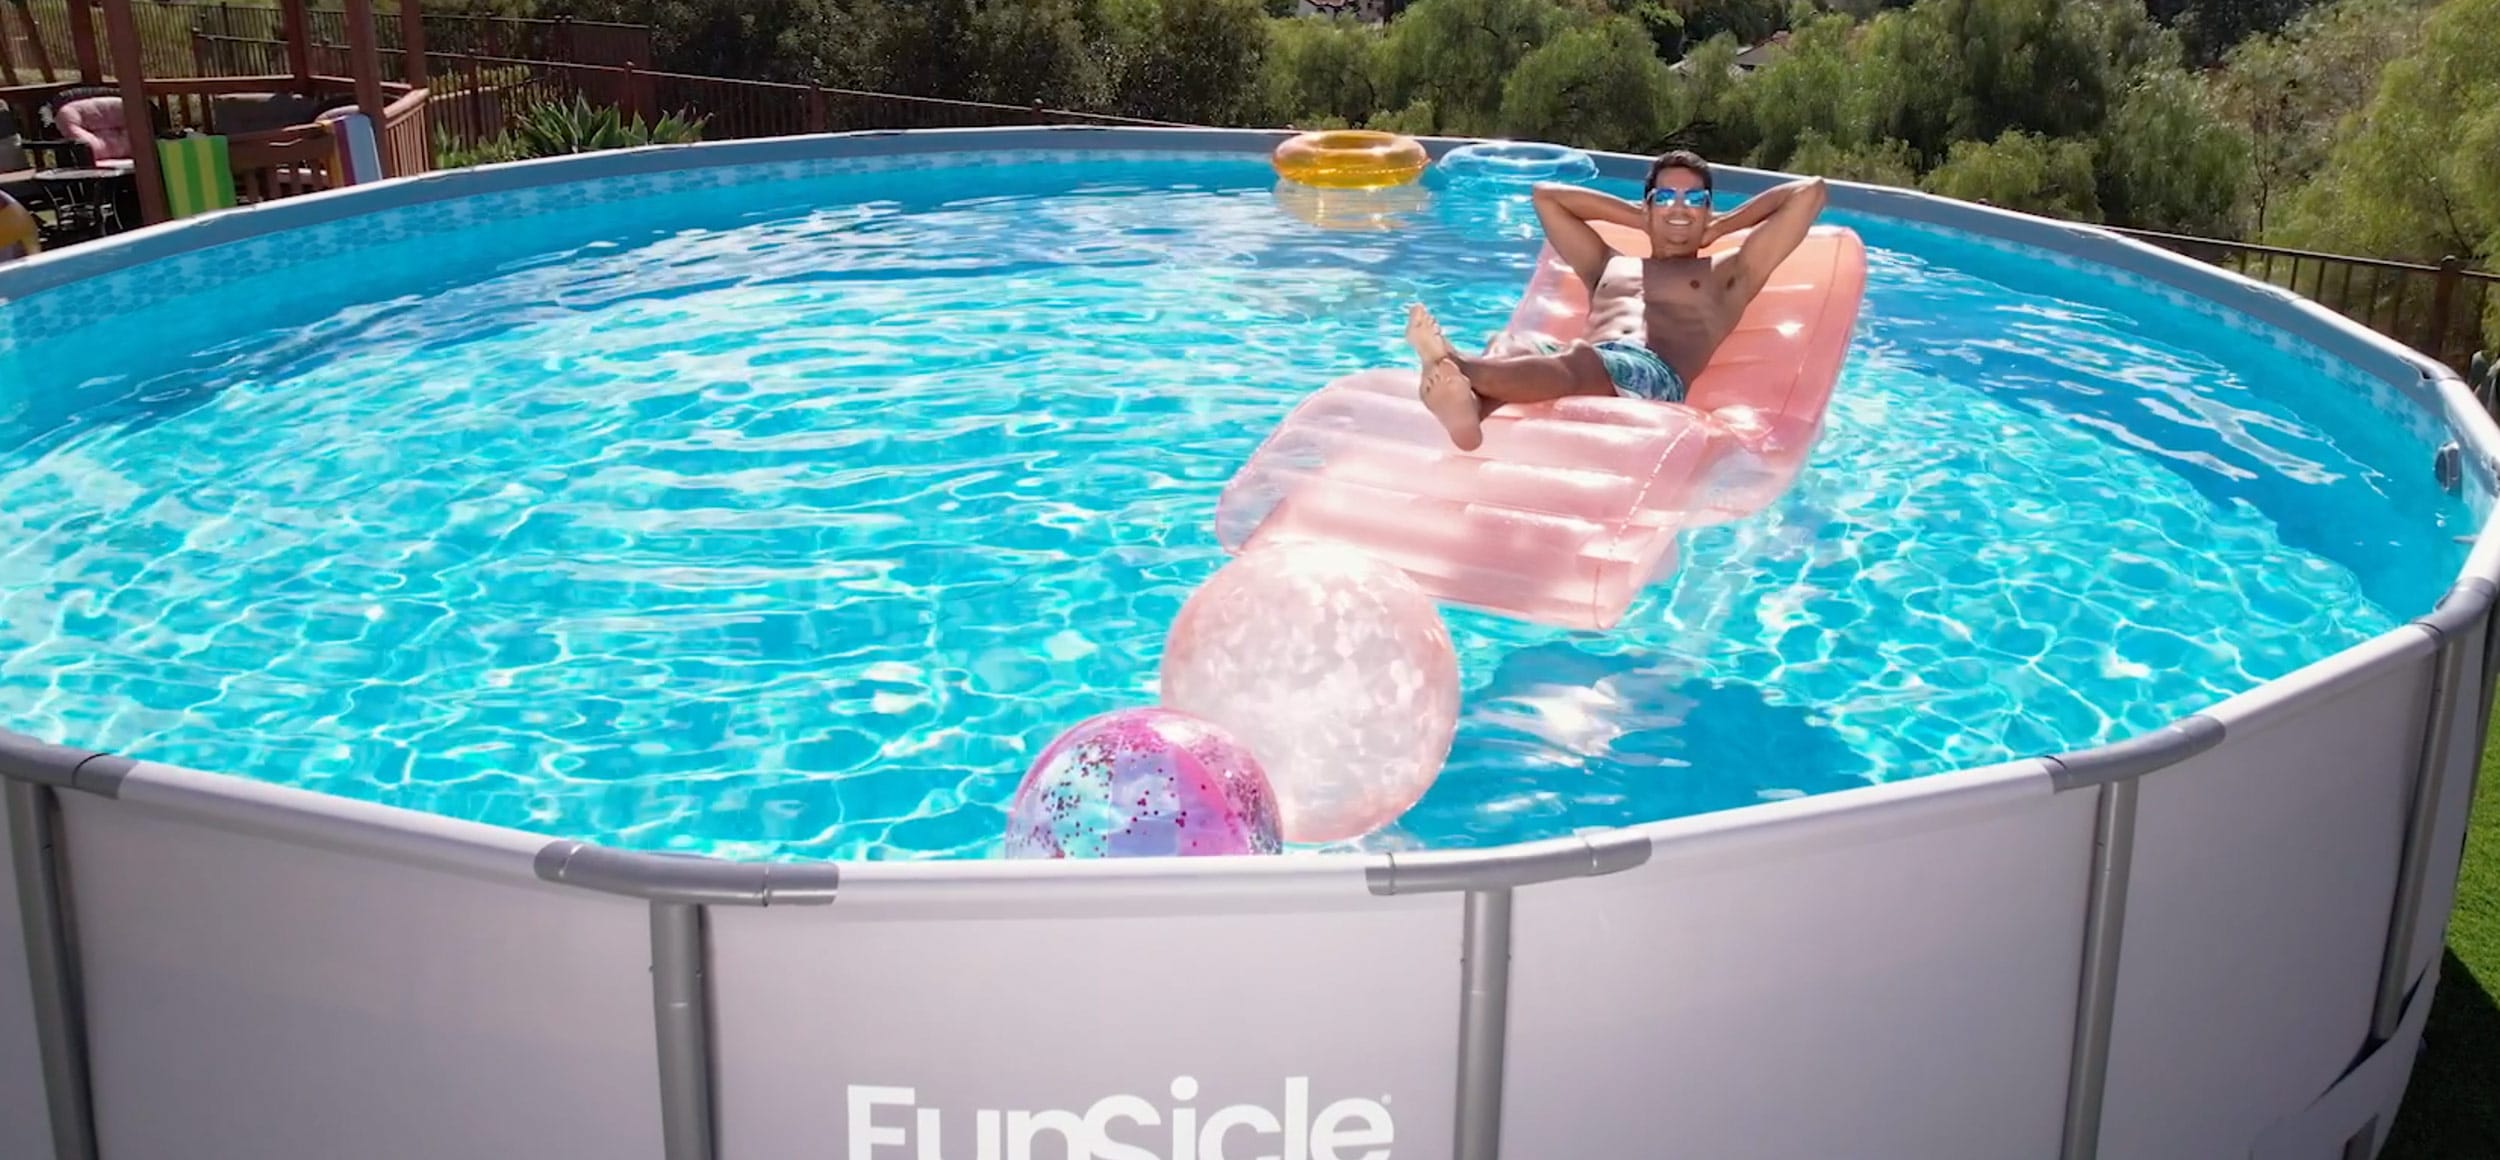 Funsicle Oasis Pool with a person on a float